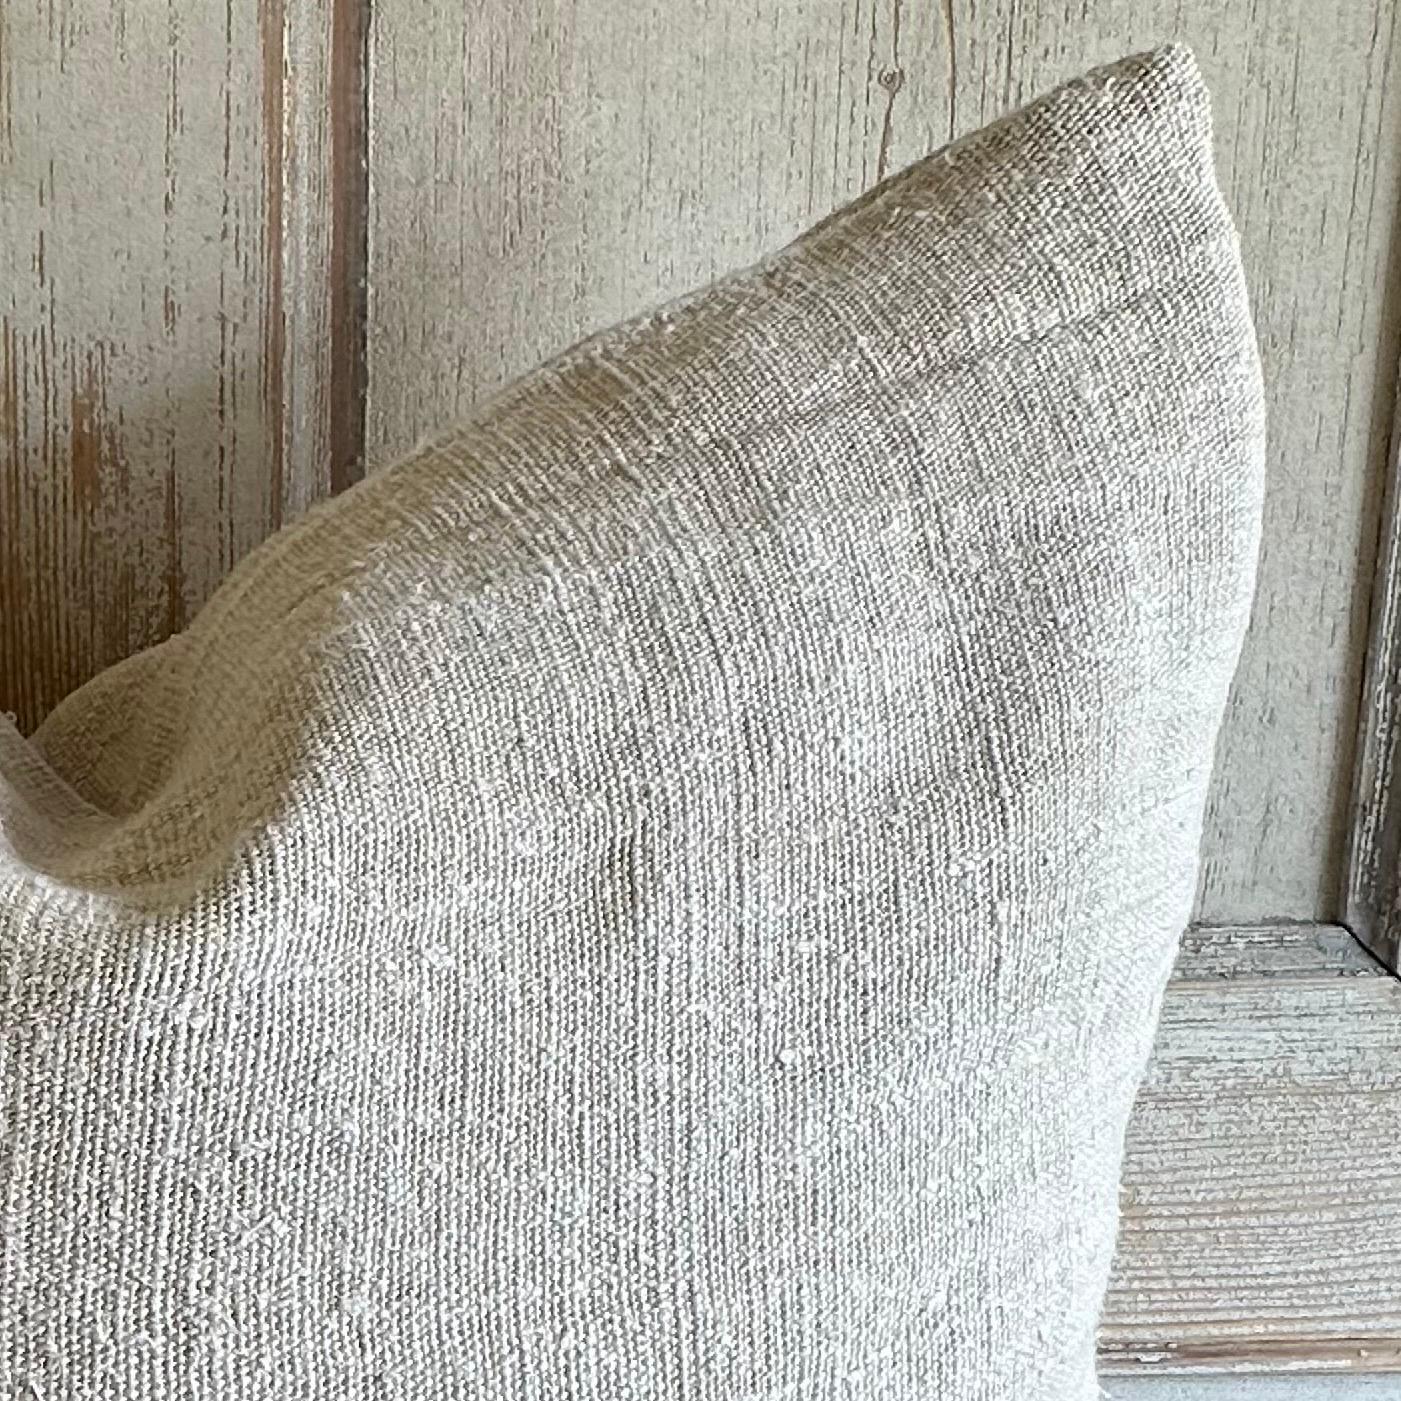 French Linen Grain Sack Shams
Color: Solid Oatmeal color
Texture: Thick, nubby heavily woven style.
Solid brass metal zipper closure
Face and back made from the same material.
Machine wash, dry low ok.
Inserts not included, but they fit any